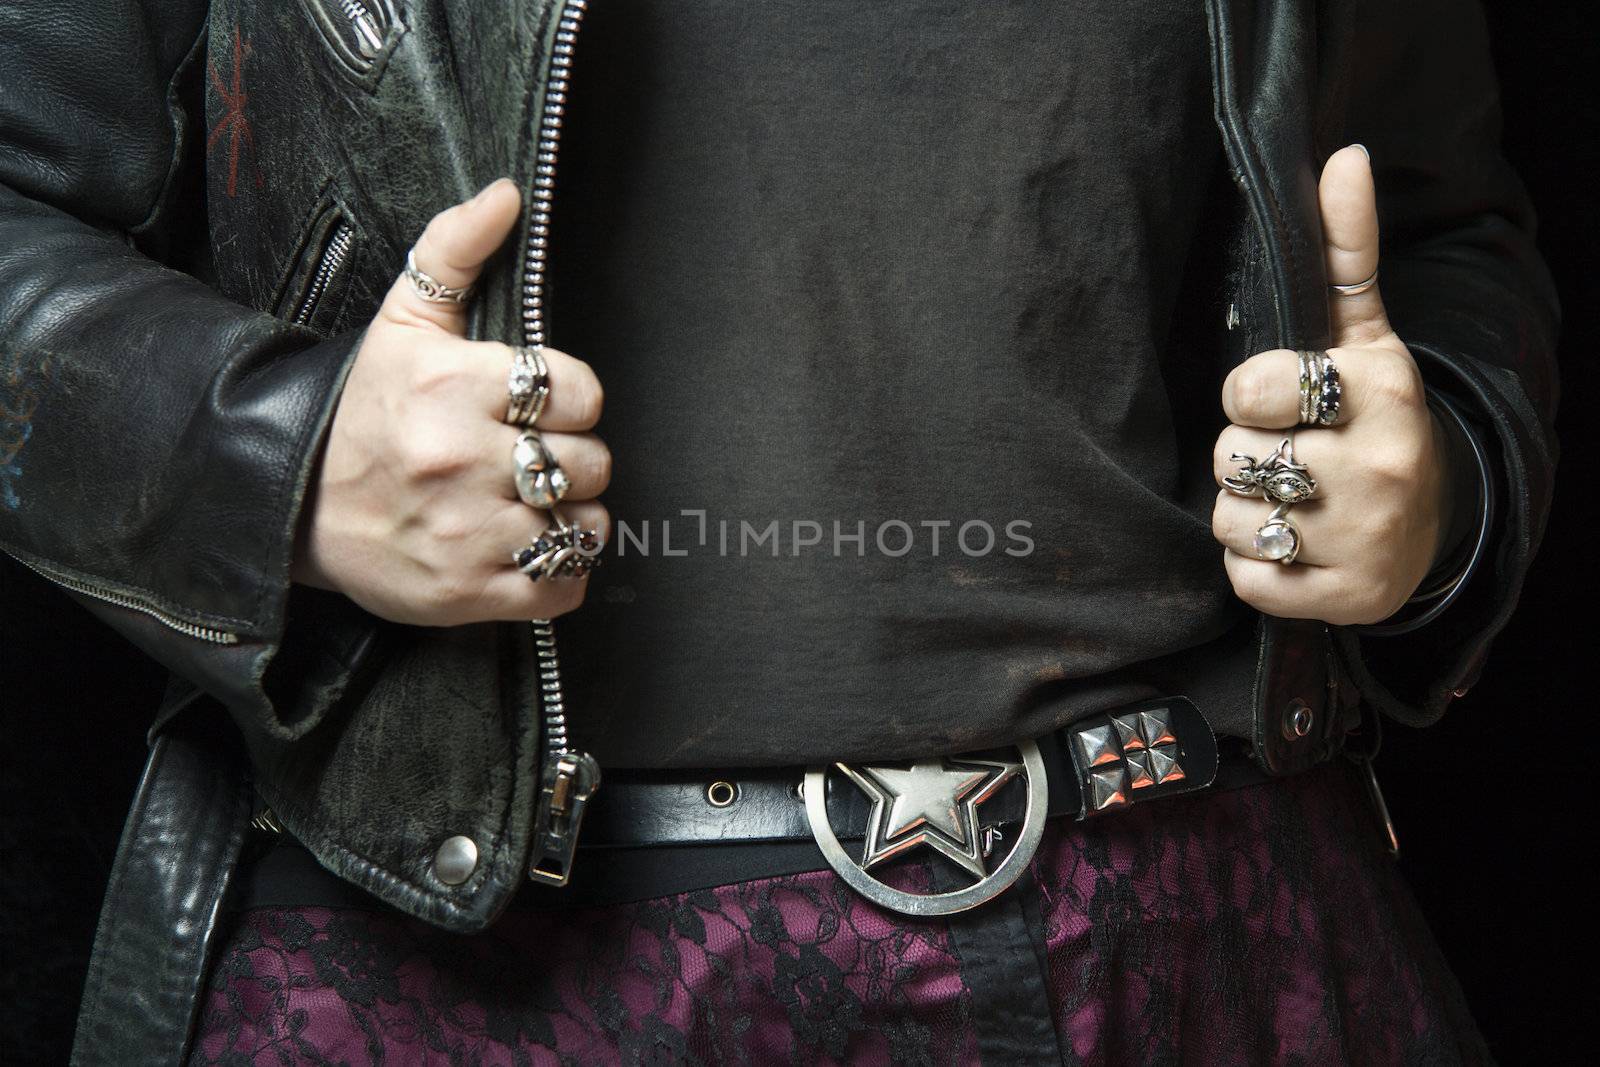 Caucasian woman's hands with silver rings holding onto black leather jacket.